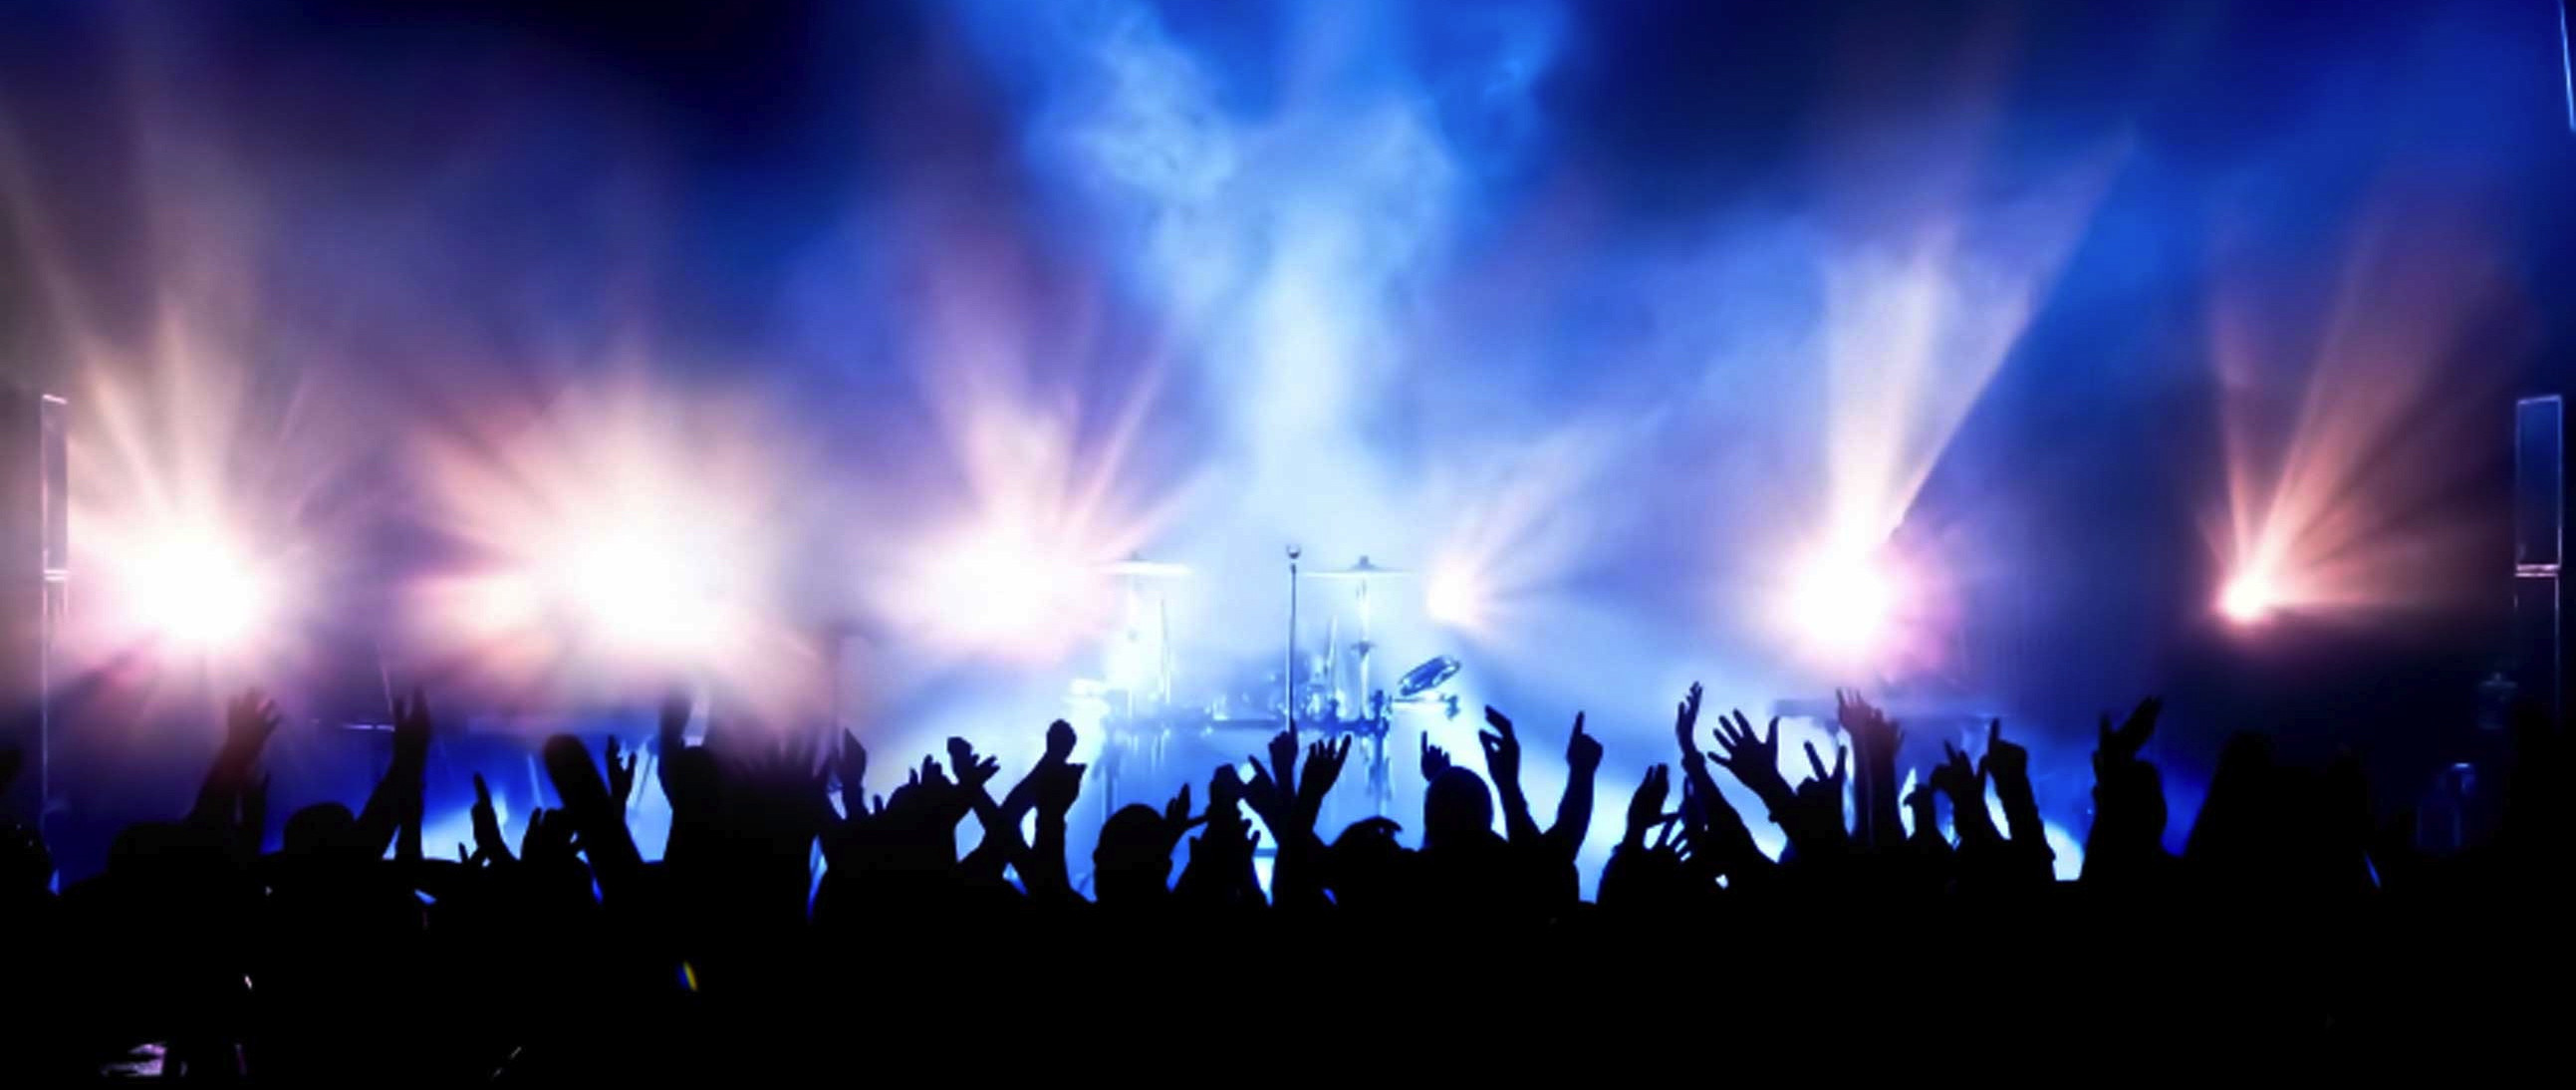 2586x1094 Concert Crowd Pictures Images and Stock Photos iStock 2586Ã1094